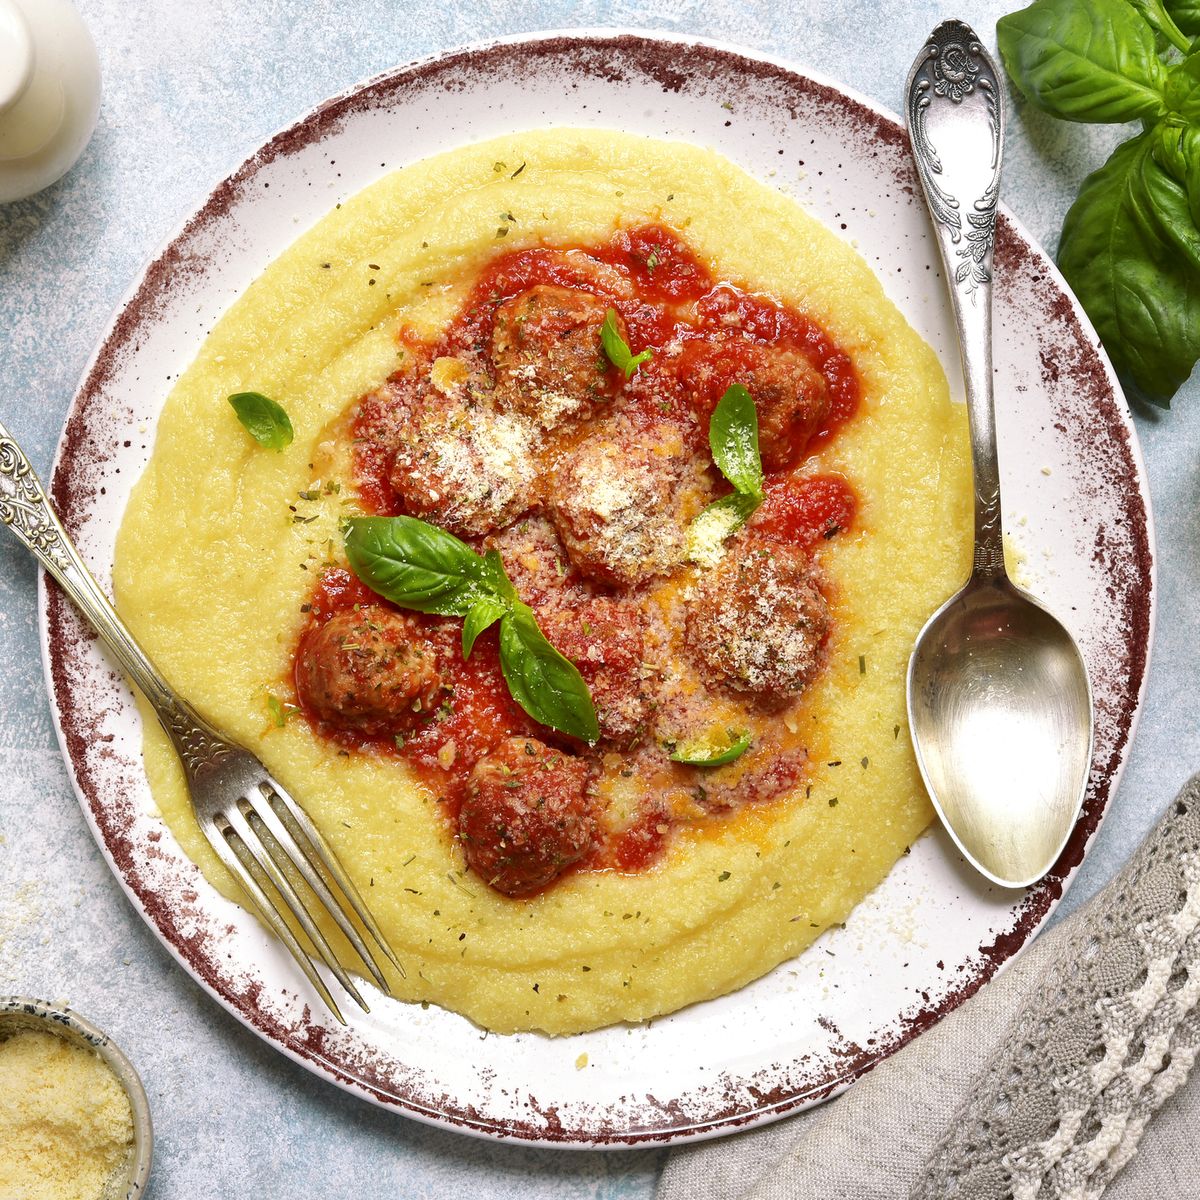 Polenta with meatballs in tomato sauce